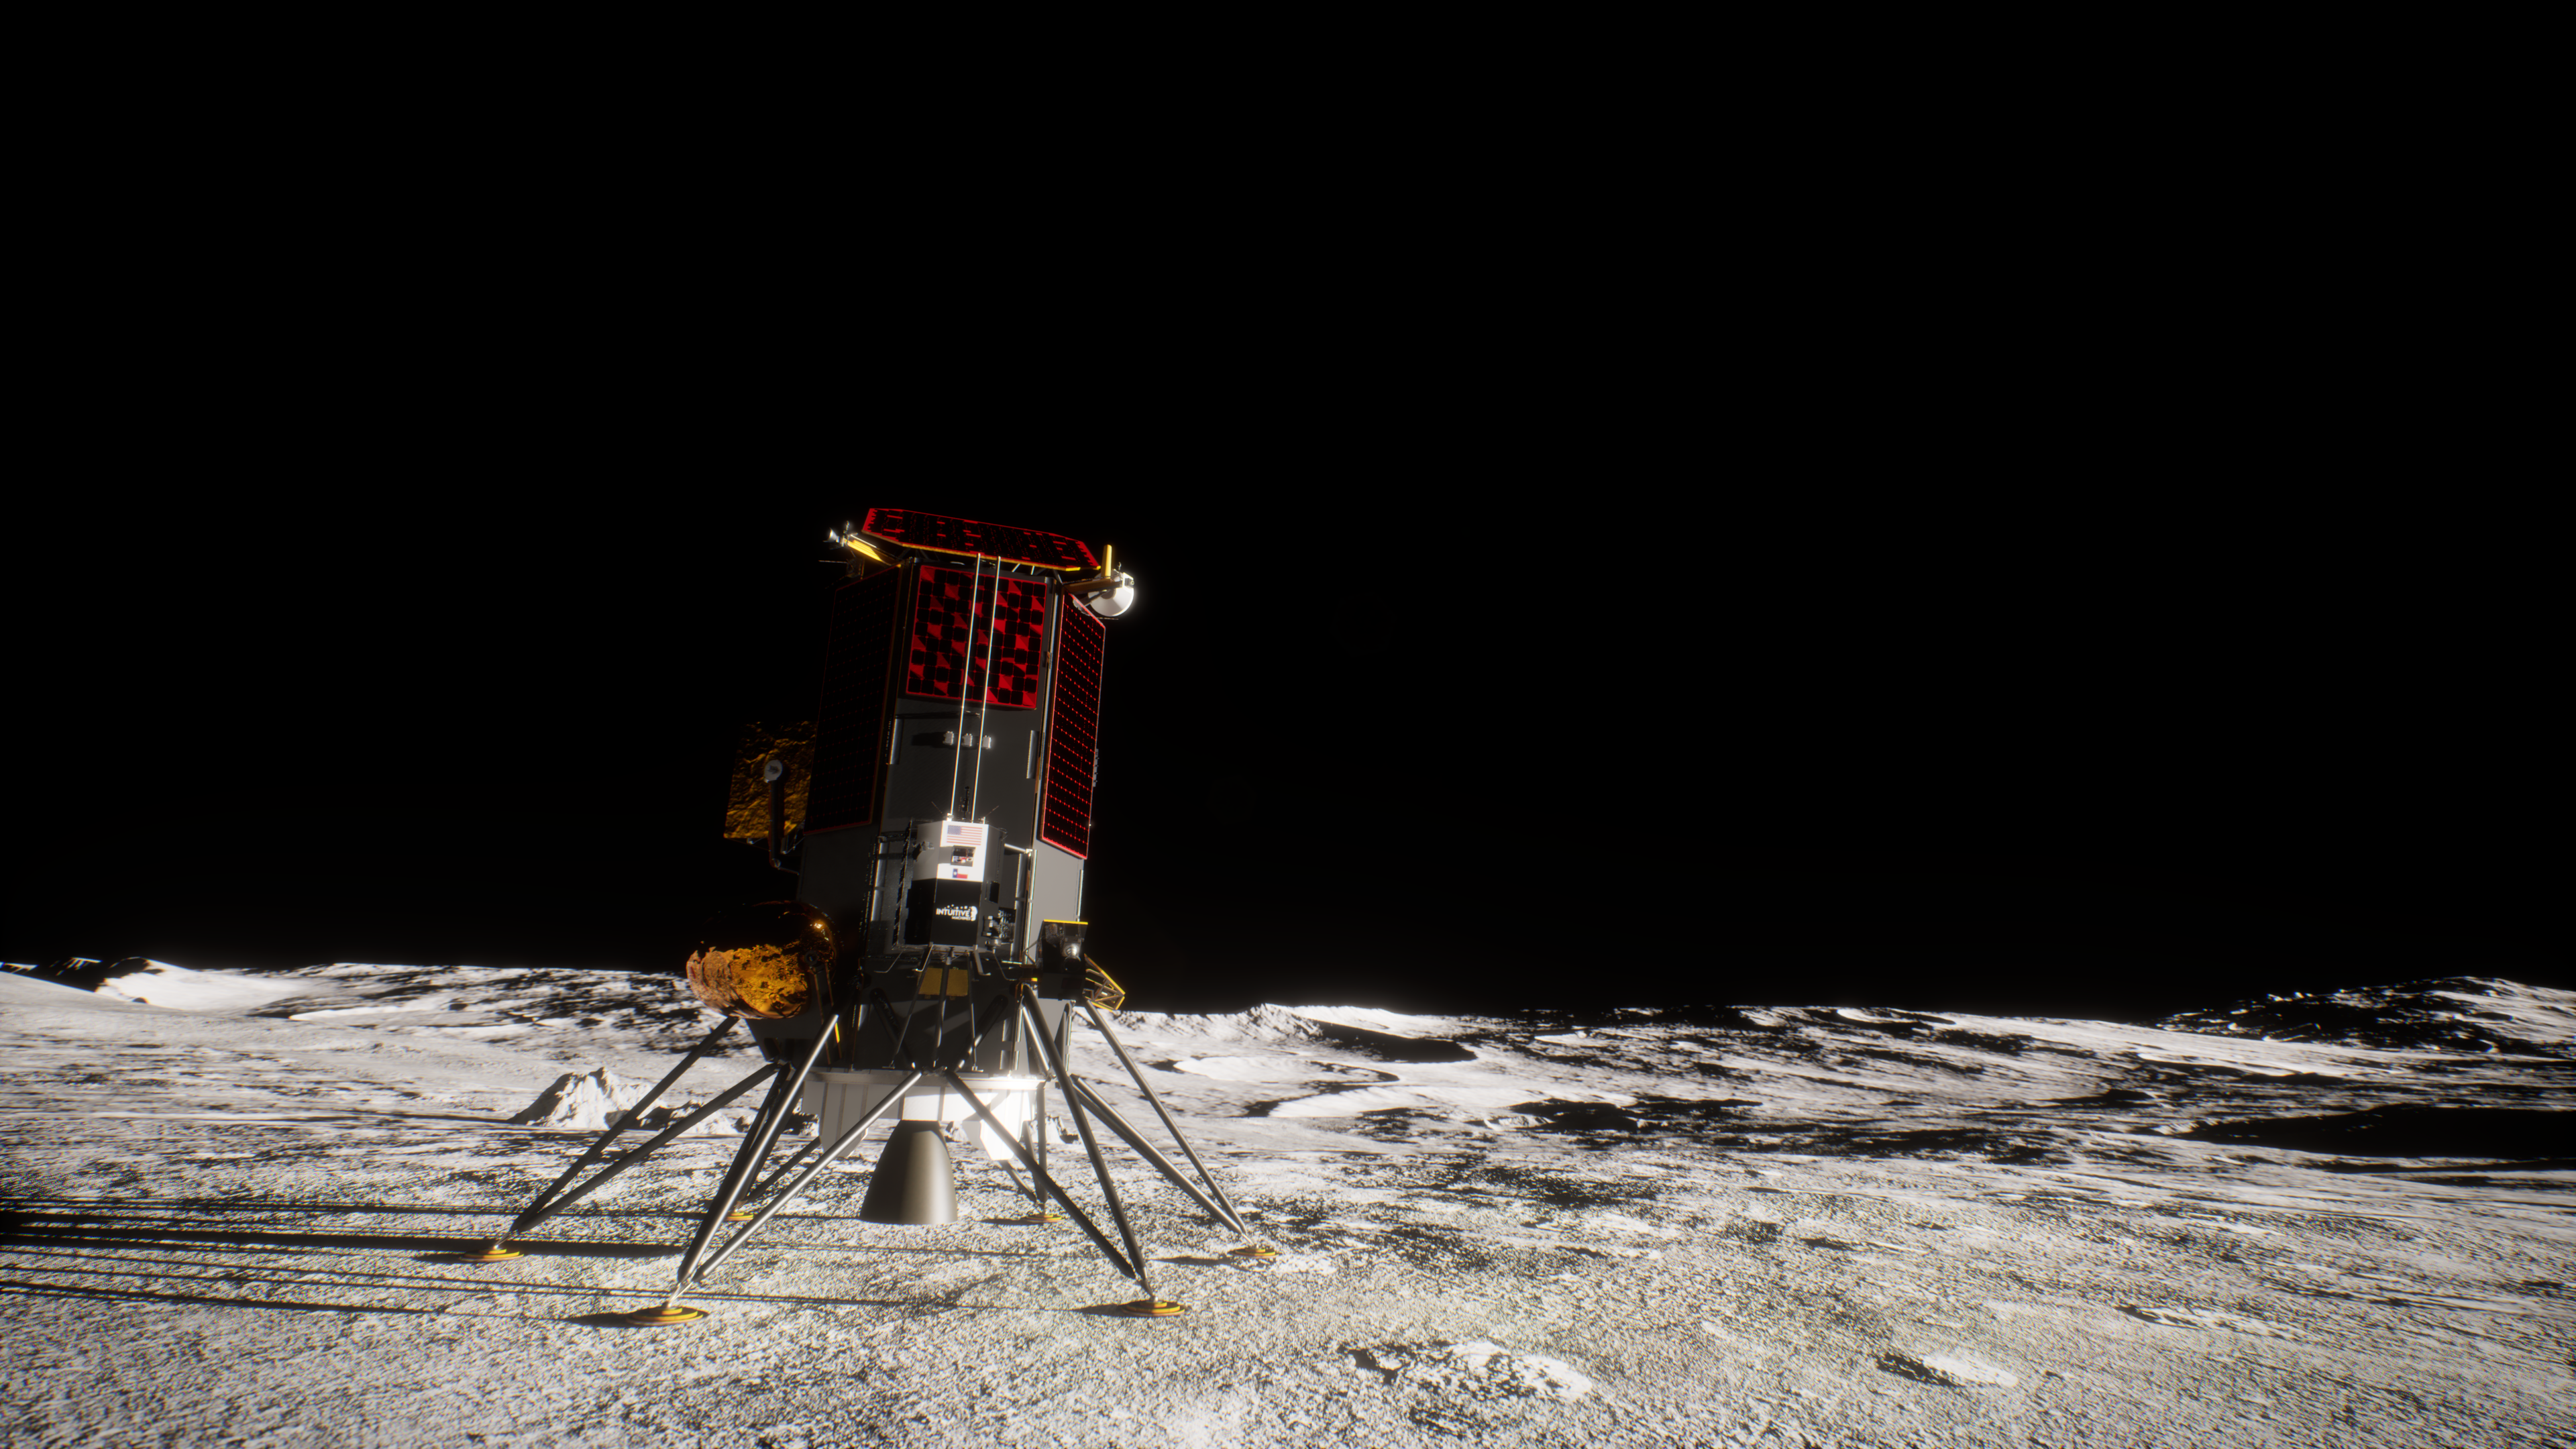 A rendering of Intuitive Machines's IM-2 lunar lander on the surface of the Moon.